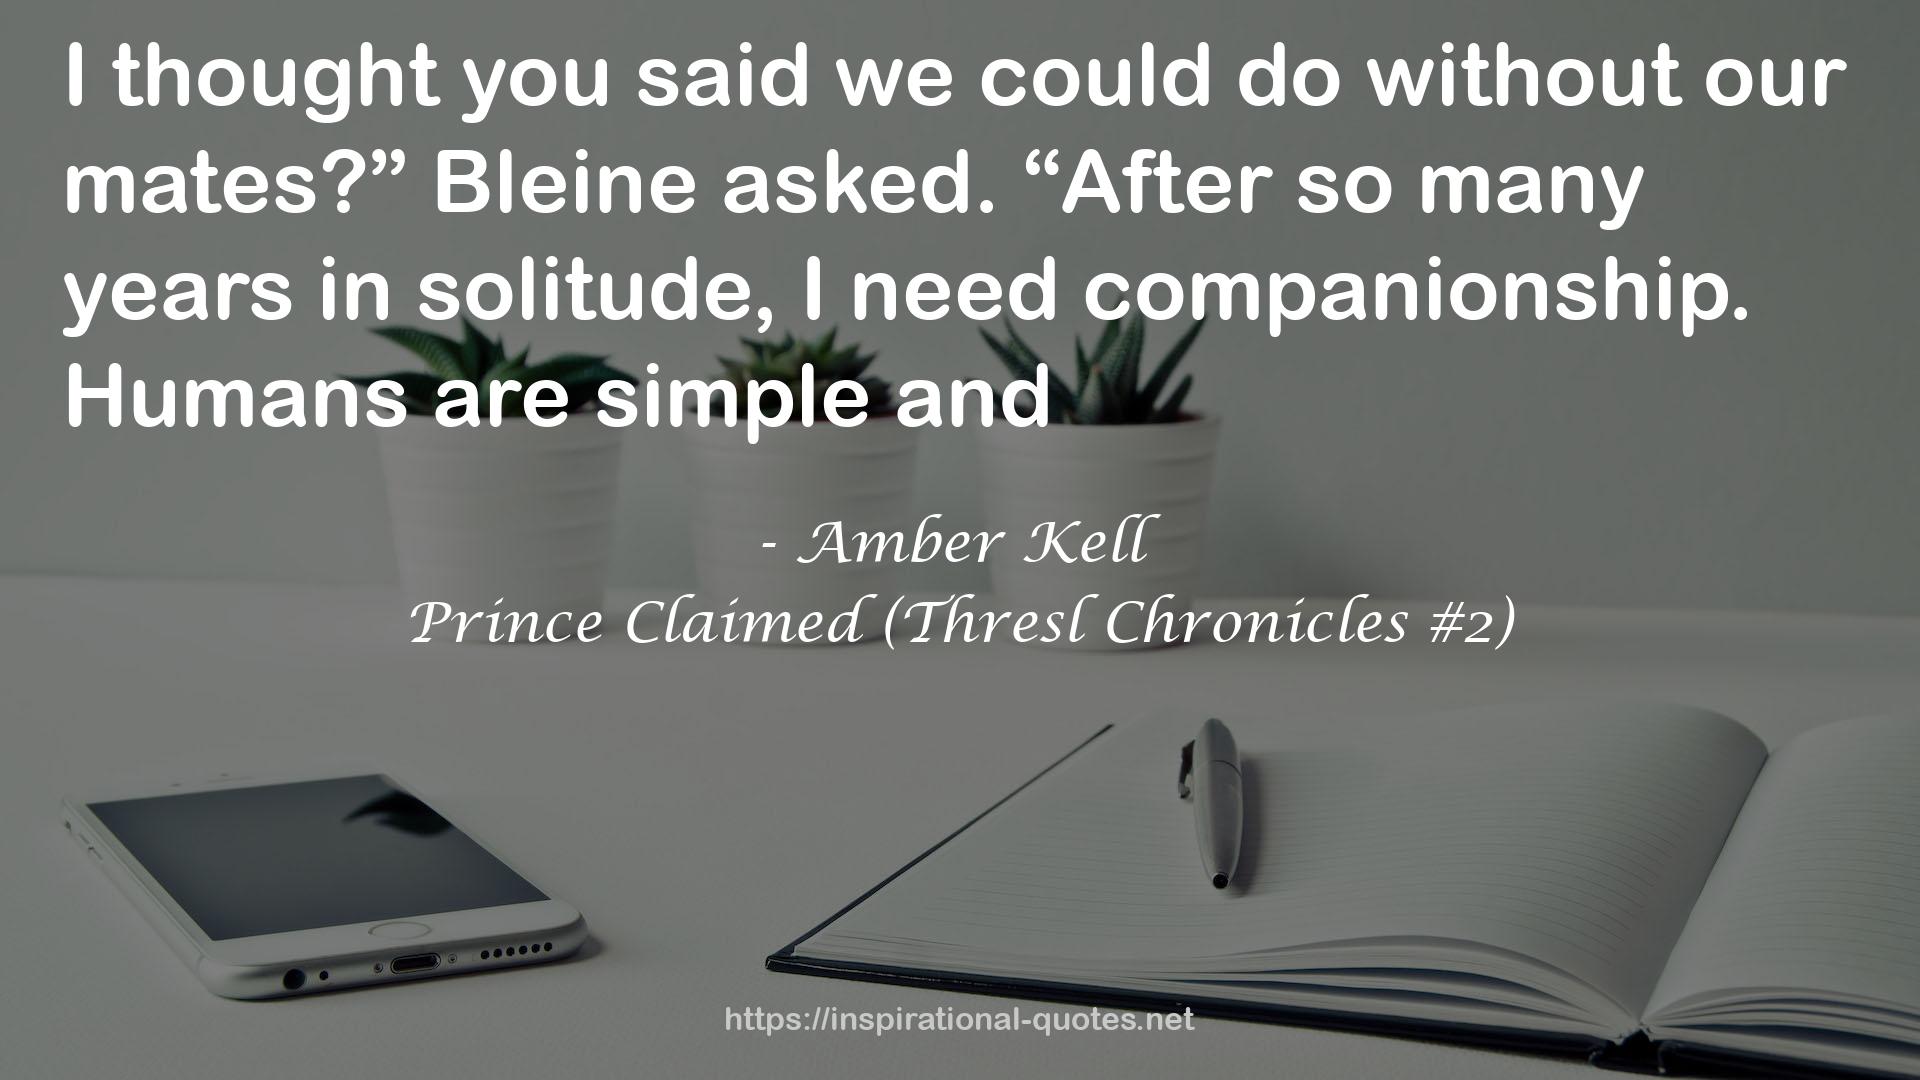 Prince Claimed (Thresl Chronicles #2) QUOTES